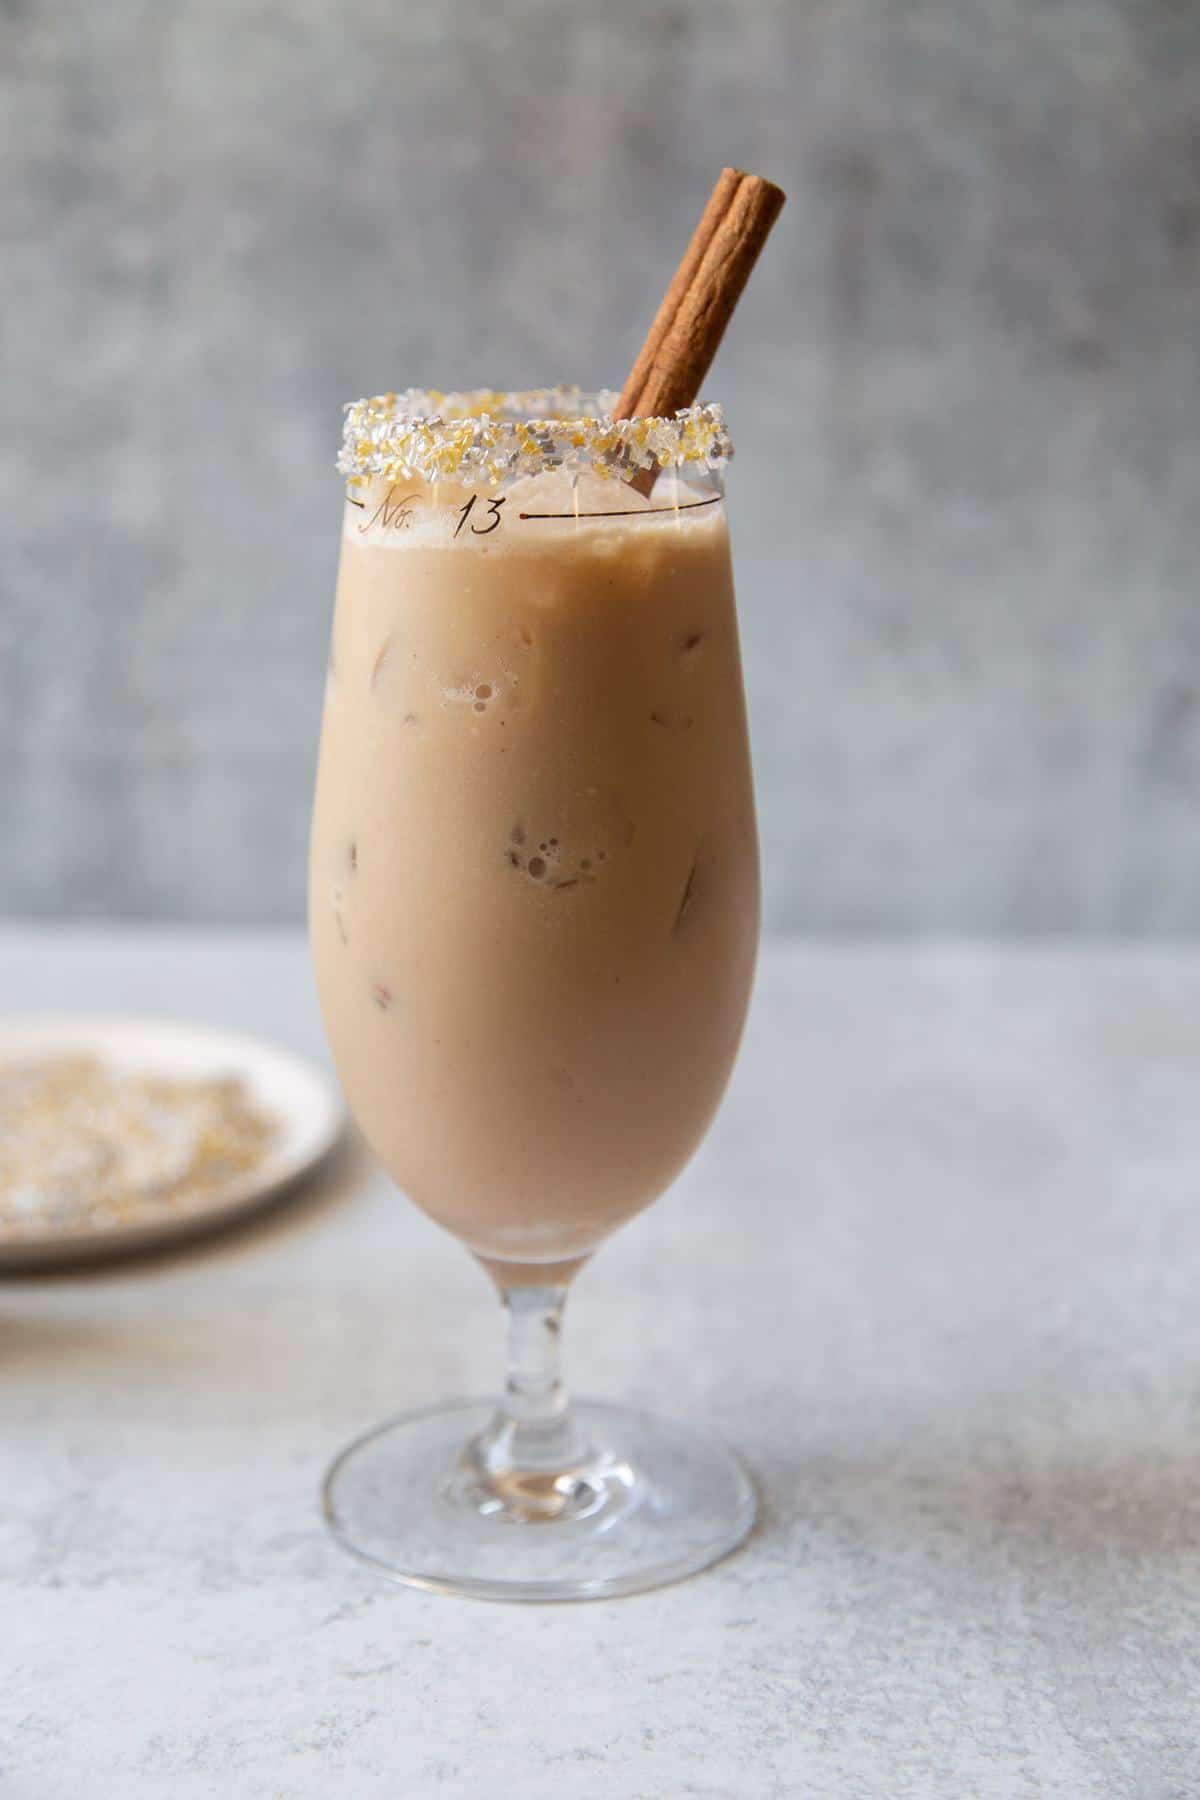 Coconut Coffee Cocktail garnished with cinnamon stick